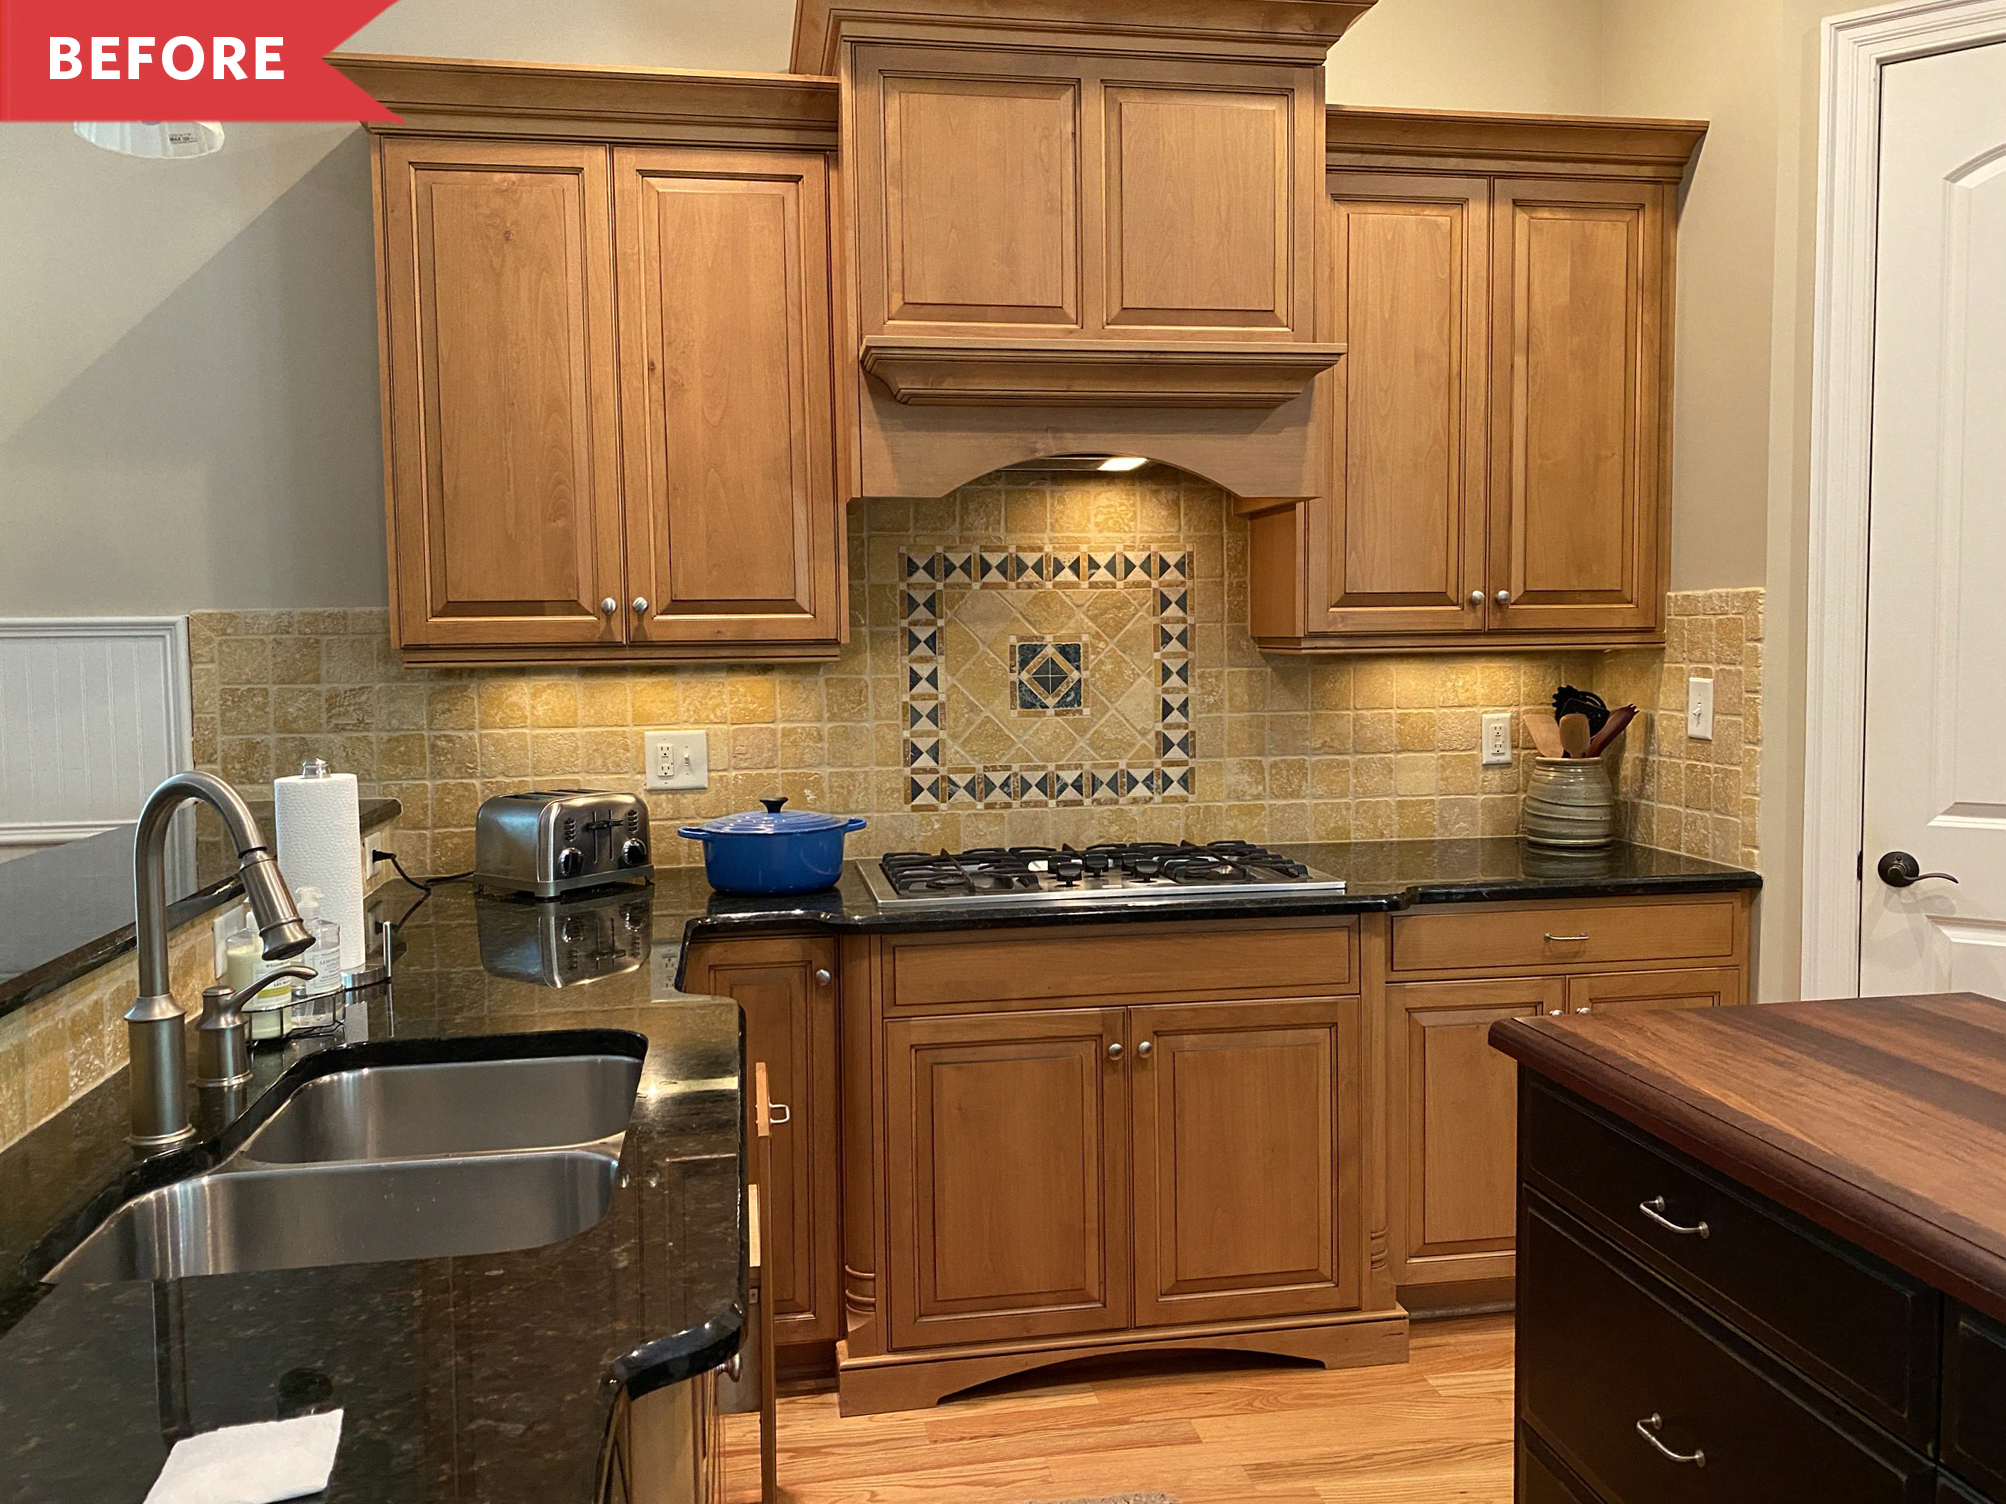 Where to Spend and Where to Save on a Kitchen Remodel